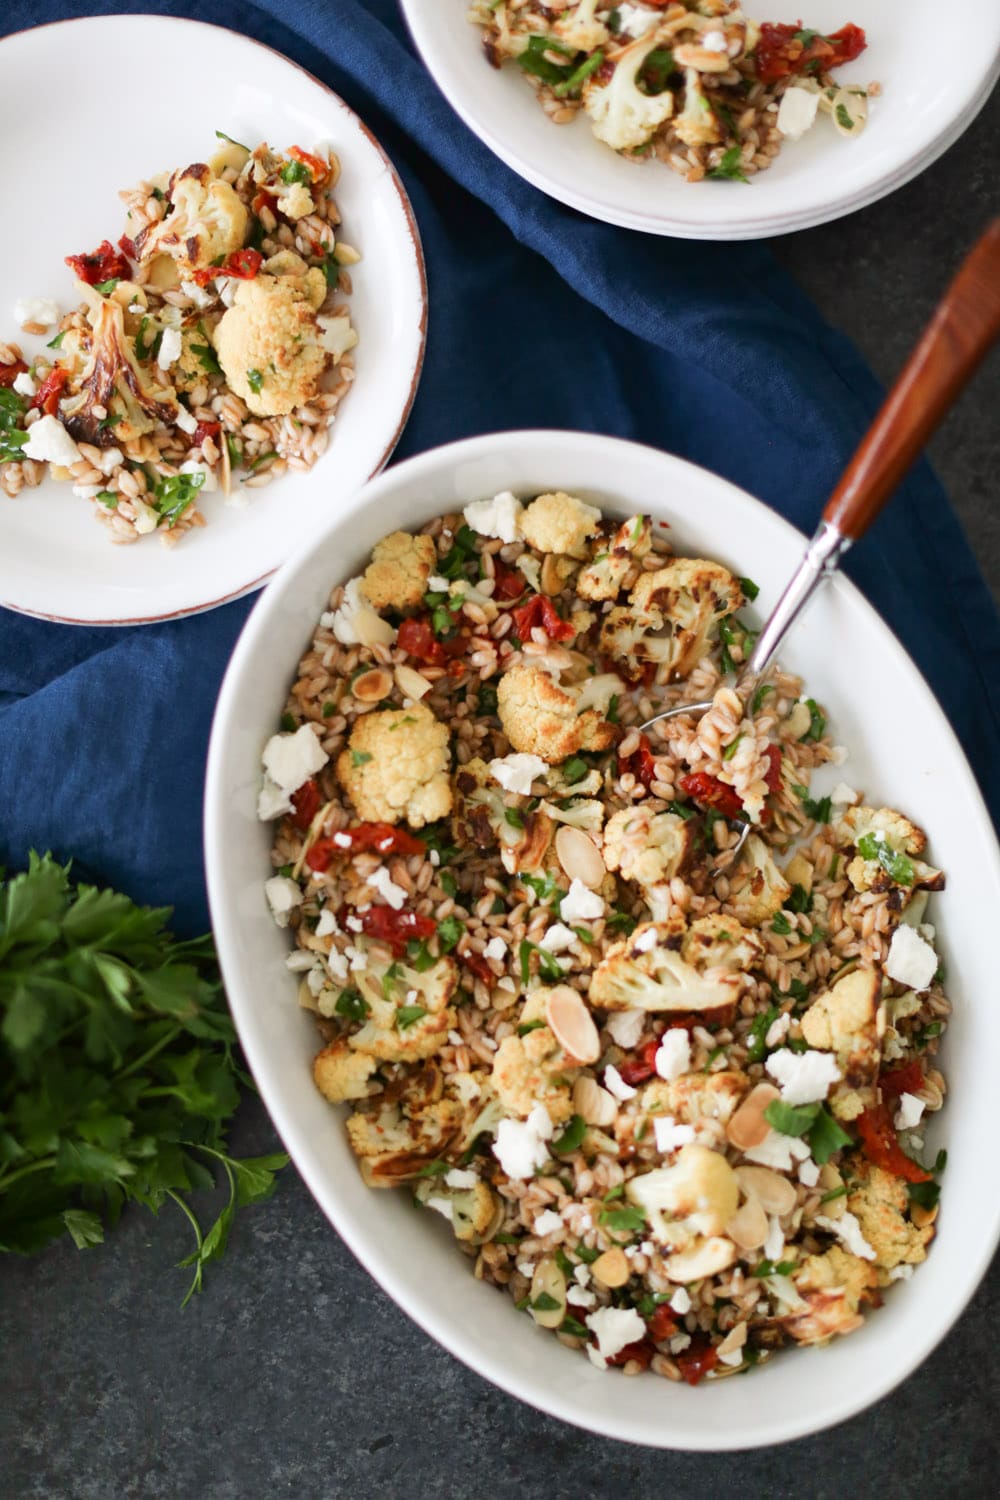 20 Satisfying Vegetarian Recipes- Roasted Cauliflower and Farro Salad with Sun-Dried Tomatoes